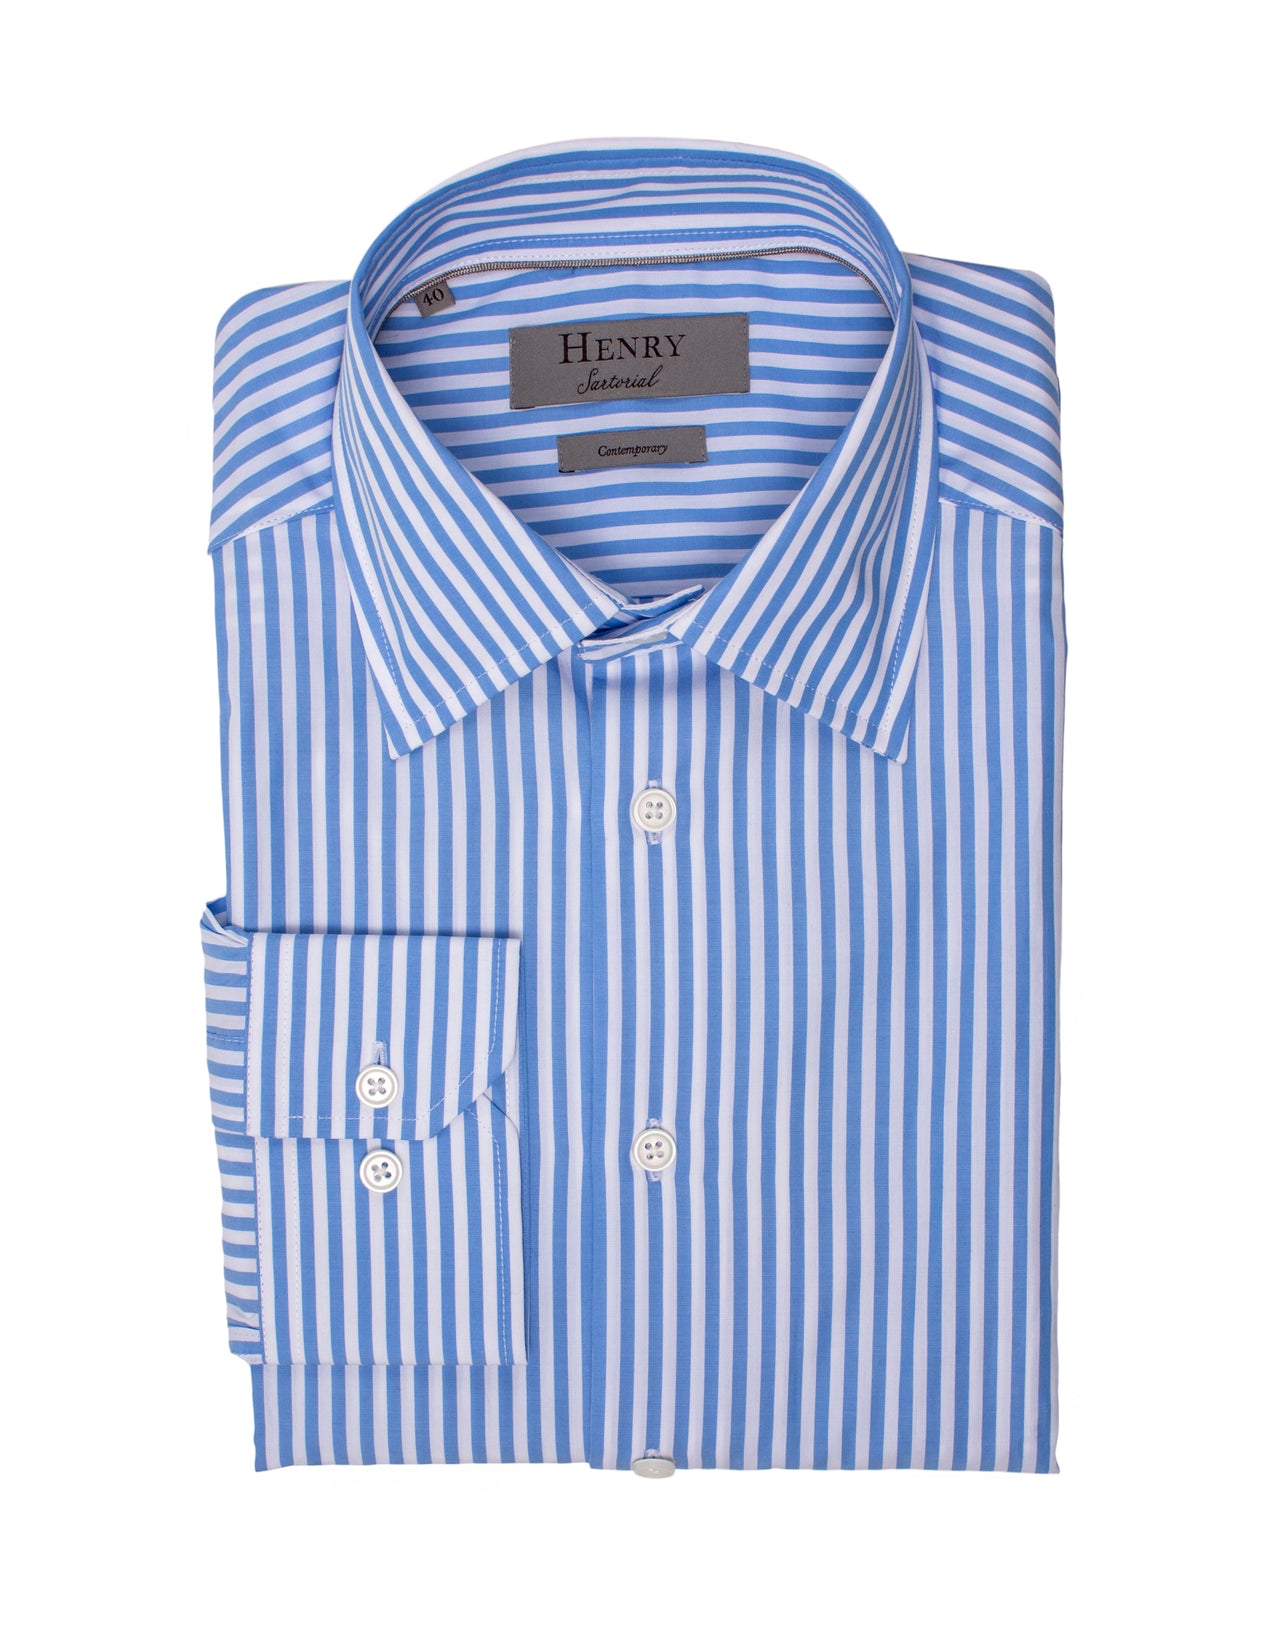 HENRY SARTORIAL Contemporary Fit Stripe Shirt NAVY/WHITE